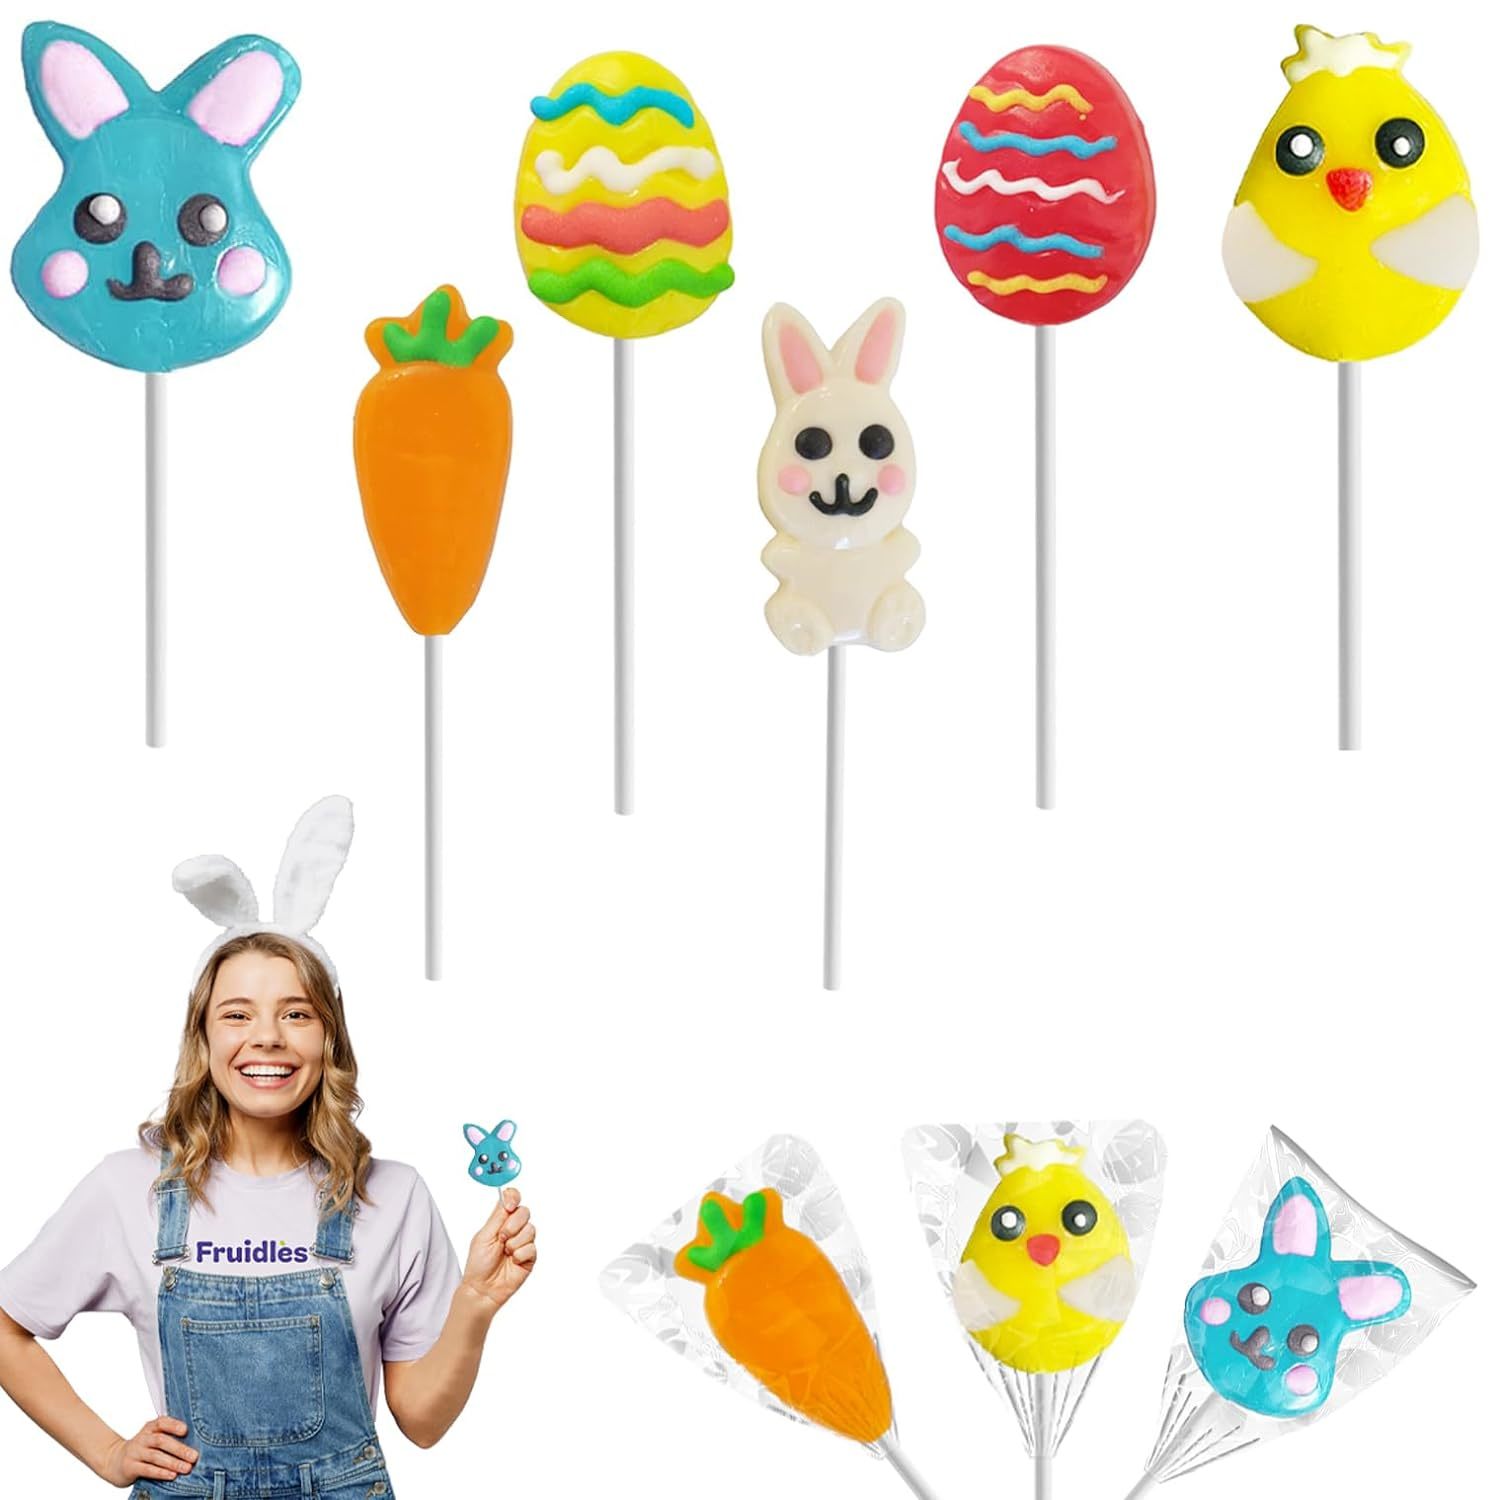 Happy Easter Variety Pack Lollipops Suckers Colorful Easter Eggs Yellow Bunny Ra - $24.80